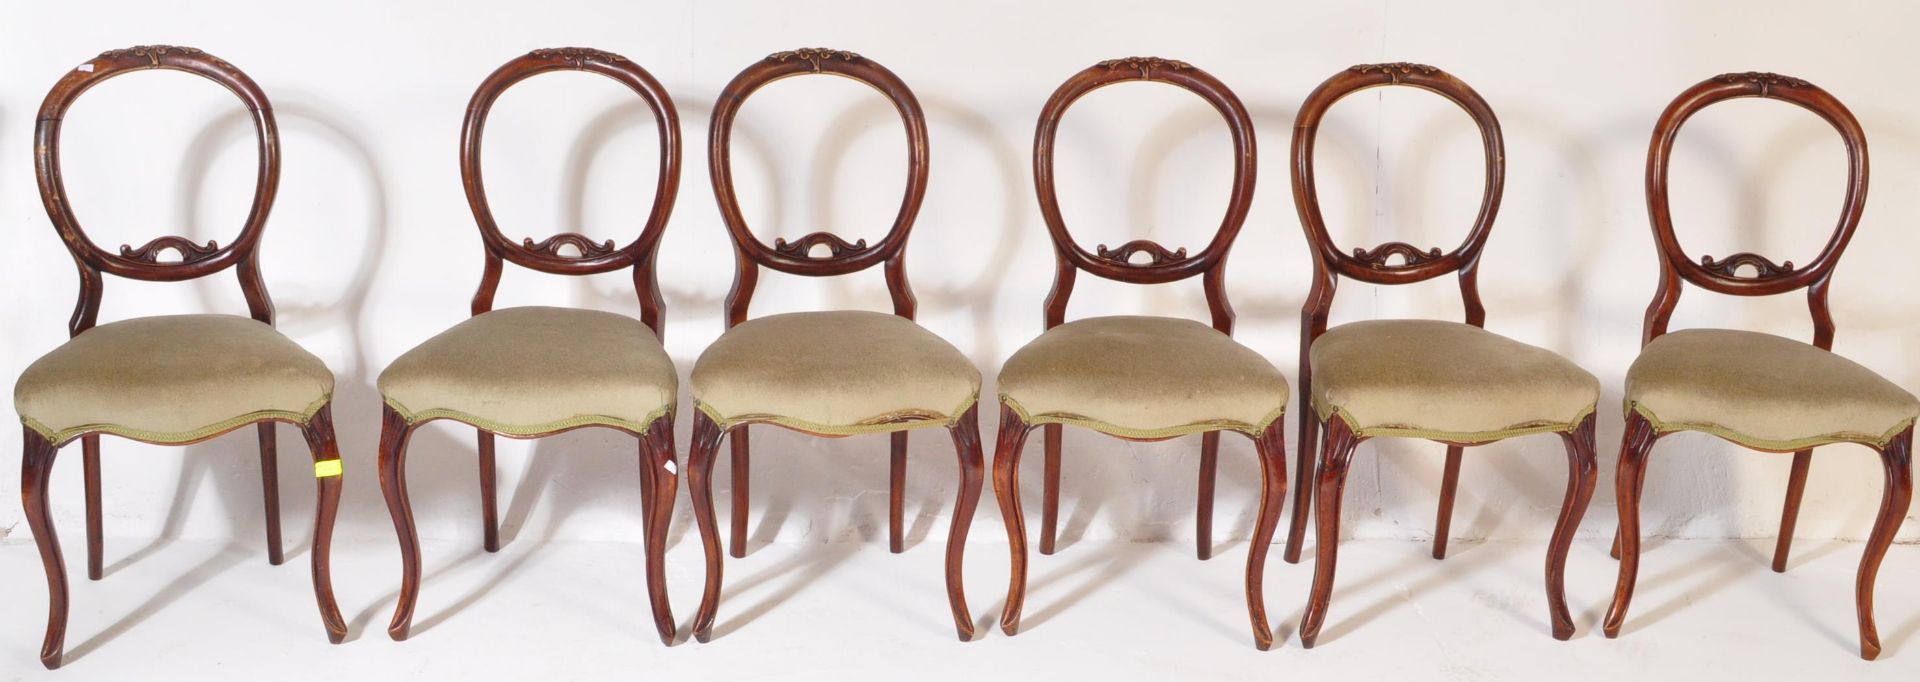 SET OF SIX VICTORIAN 19TH CENTURY BALLOON BACK CHAIRS - Image 2 of 5